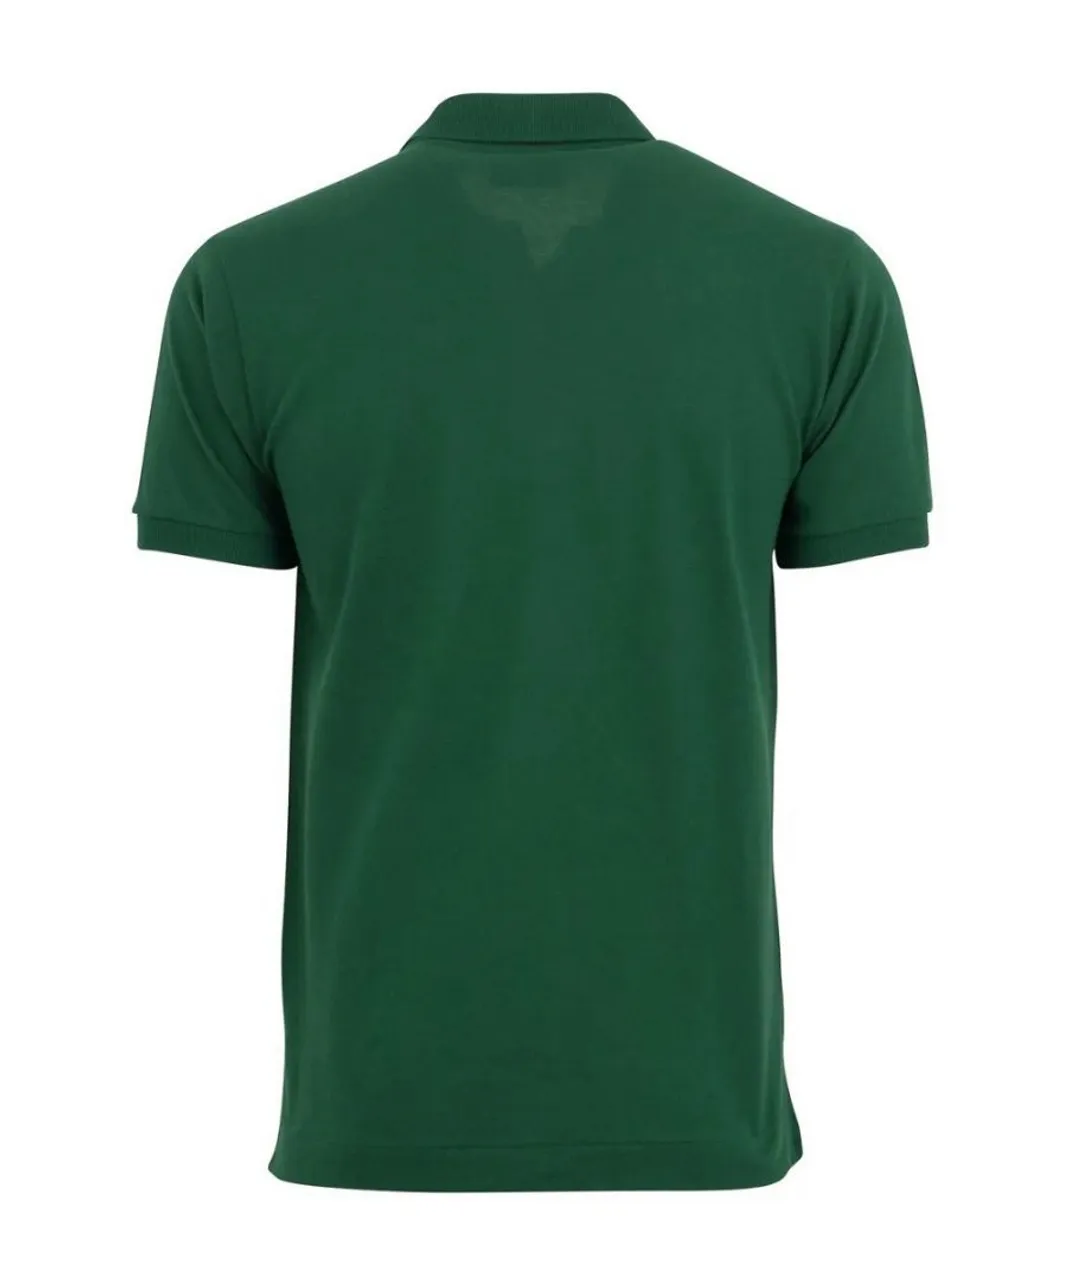 Lacoste Mens Polo SS L1212 Classic Fit Green Cotton